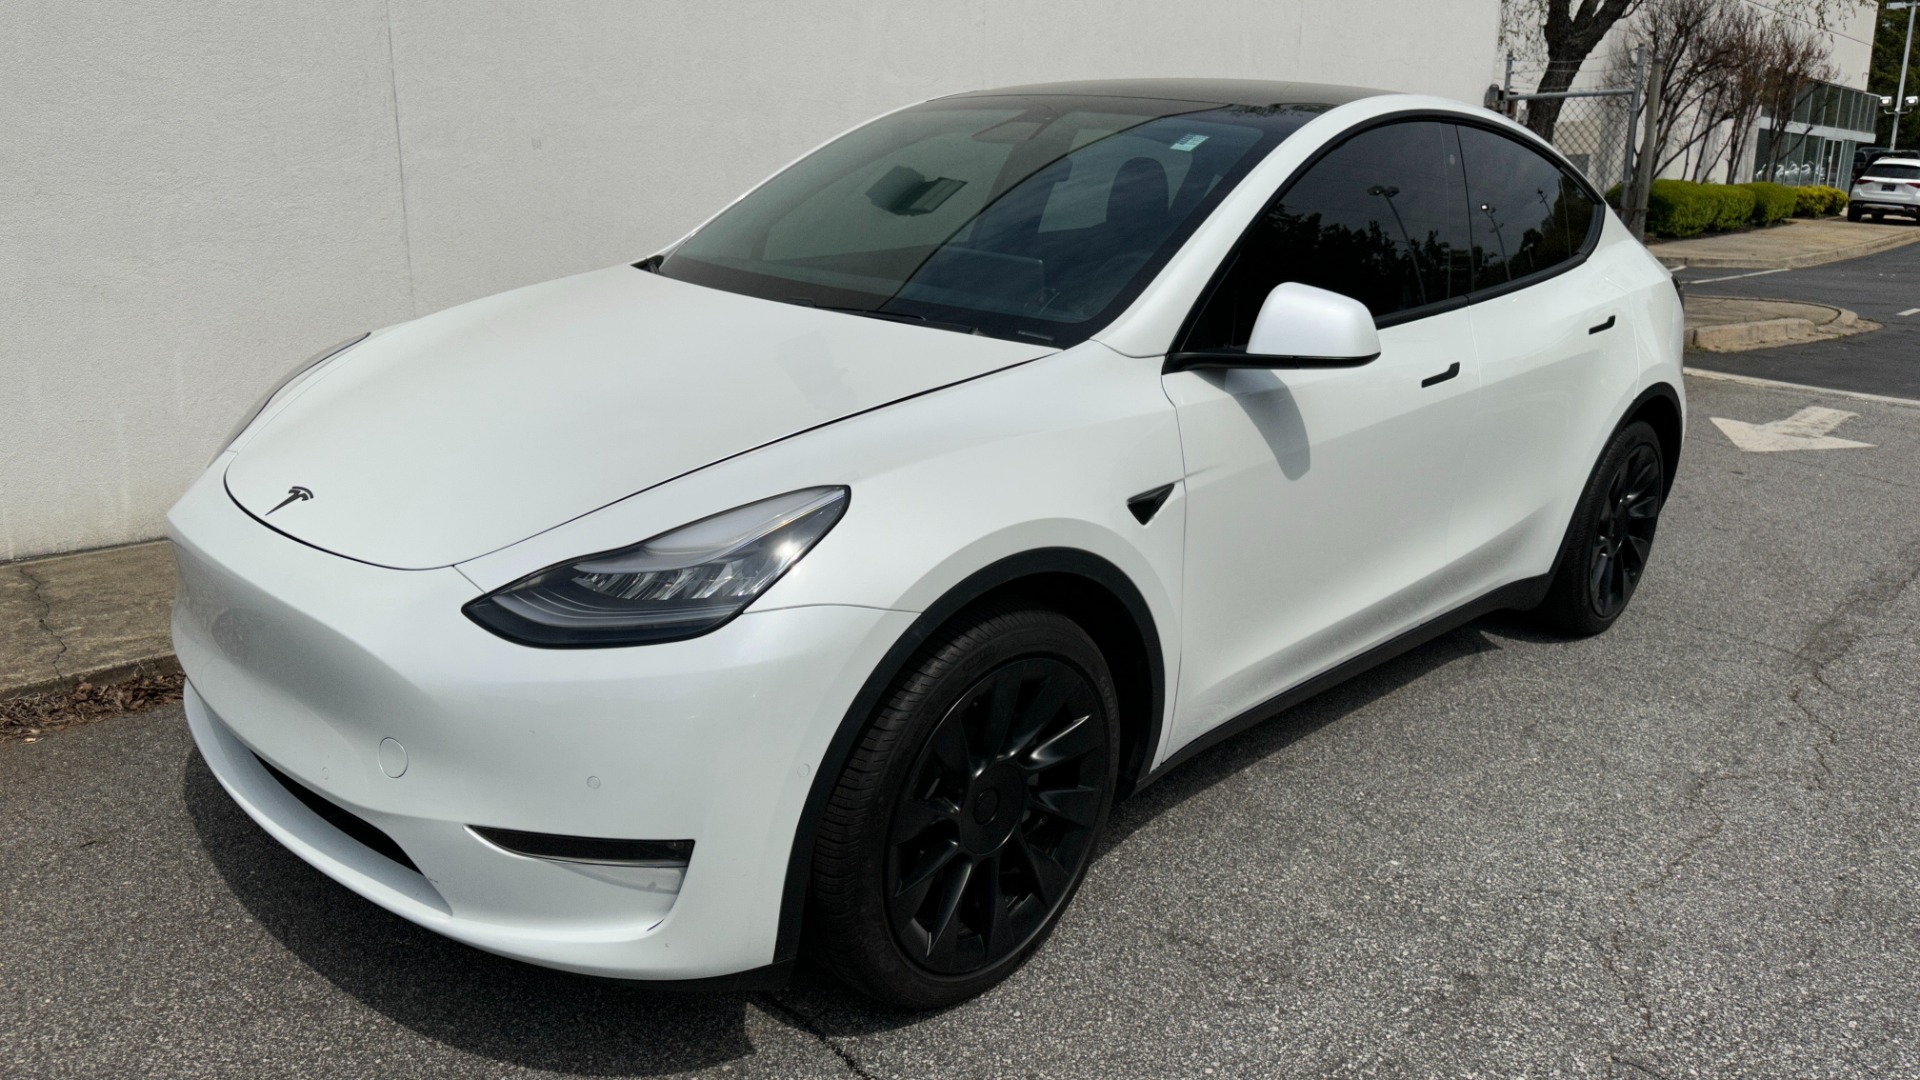 Used 2020 Tesla MODEL Y LONG RANGE ACCELERATION BOOST / AUTOPILOT / STANDARD CONNECTIVITY / WOOD TRIM for sale $44,495 at Formula Imports in Charlotte NC 28227 2